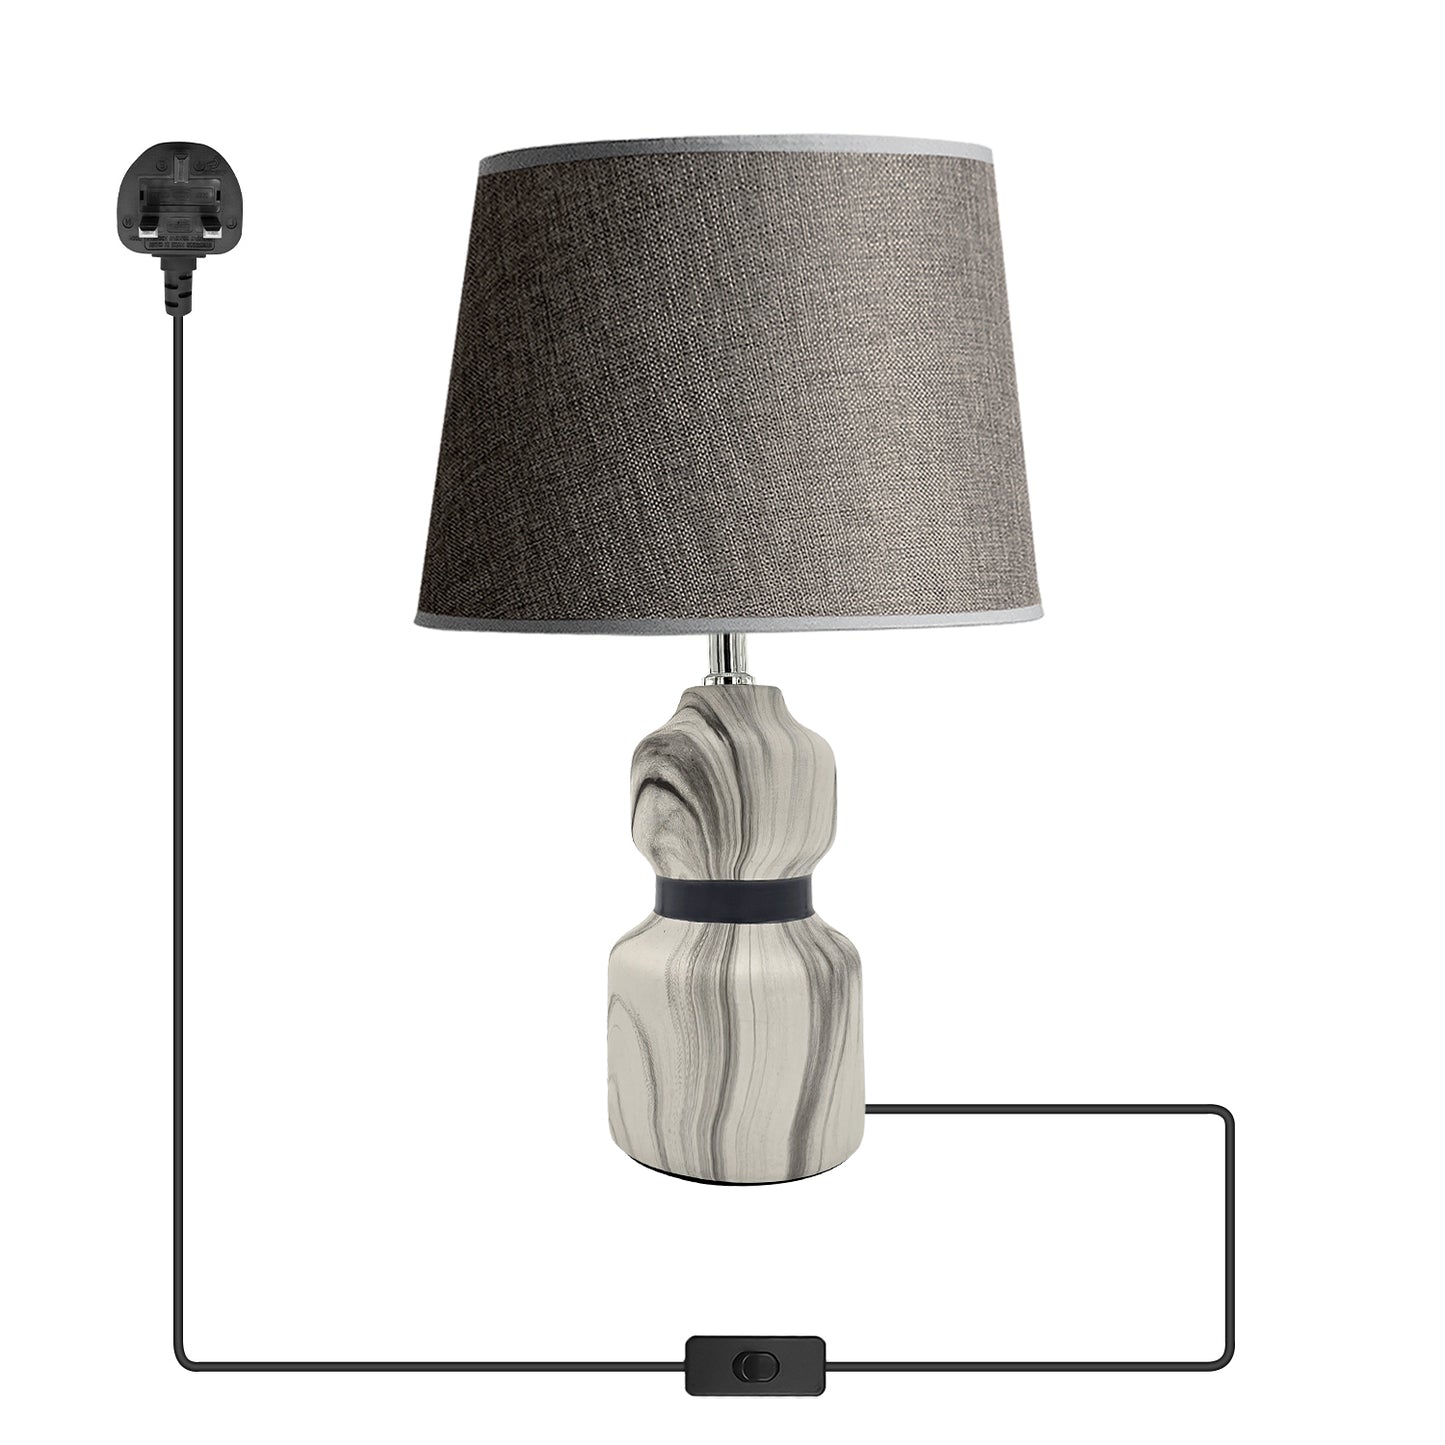 Modern Ceramic Grey Table Lamp Ideal for Bedside and Desk Use